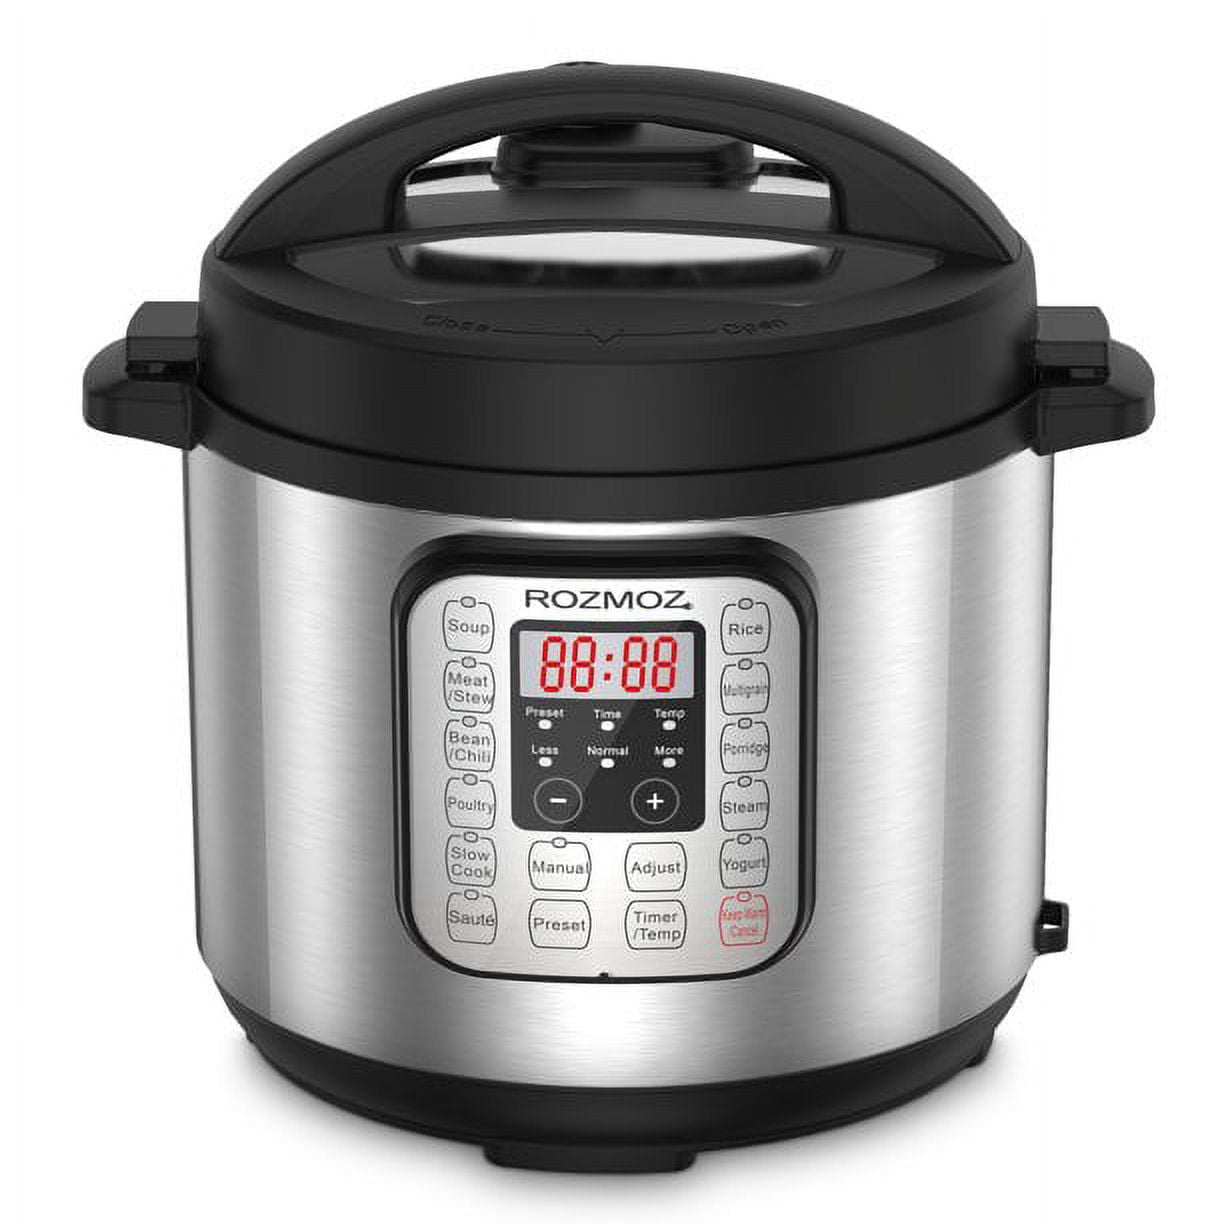 Stainless Steel Pressure Cooker (6 L) Sofram Size: 6.3 qt.